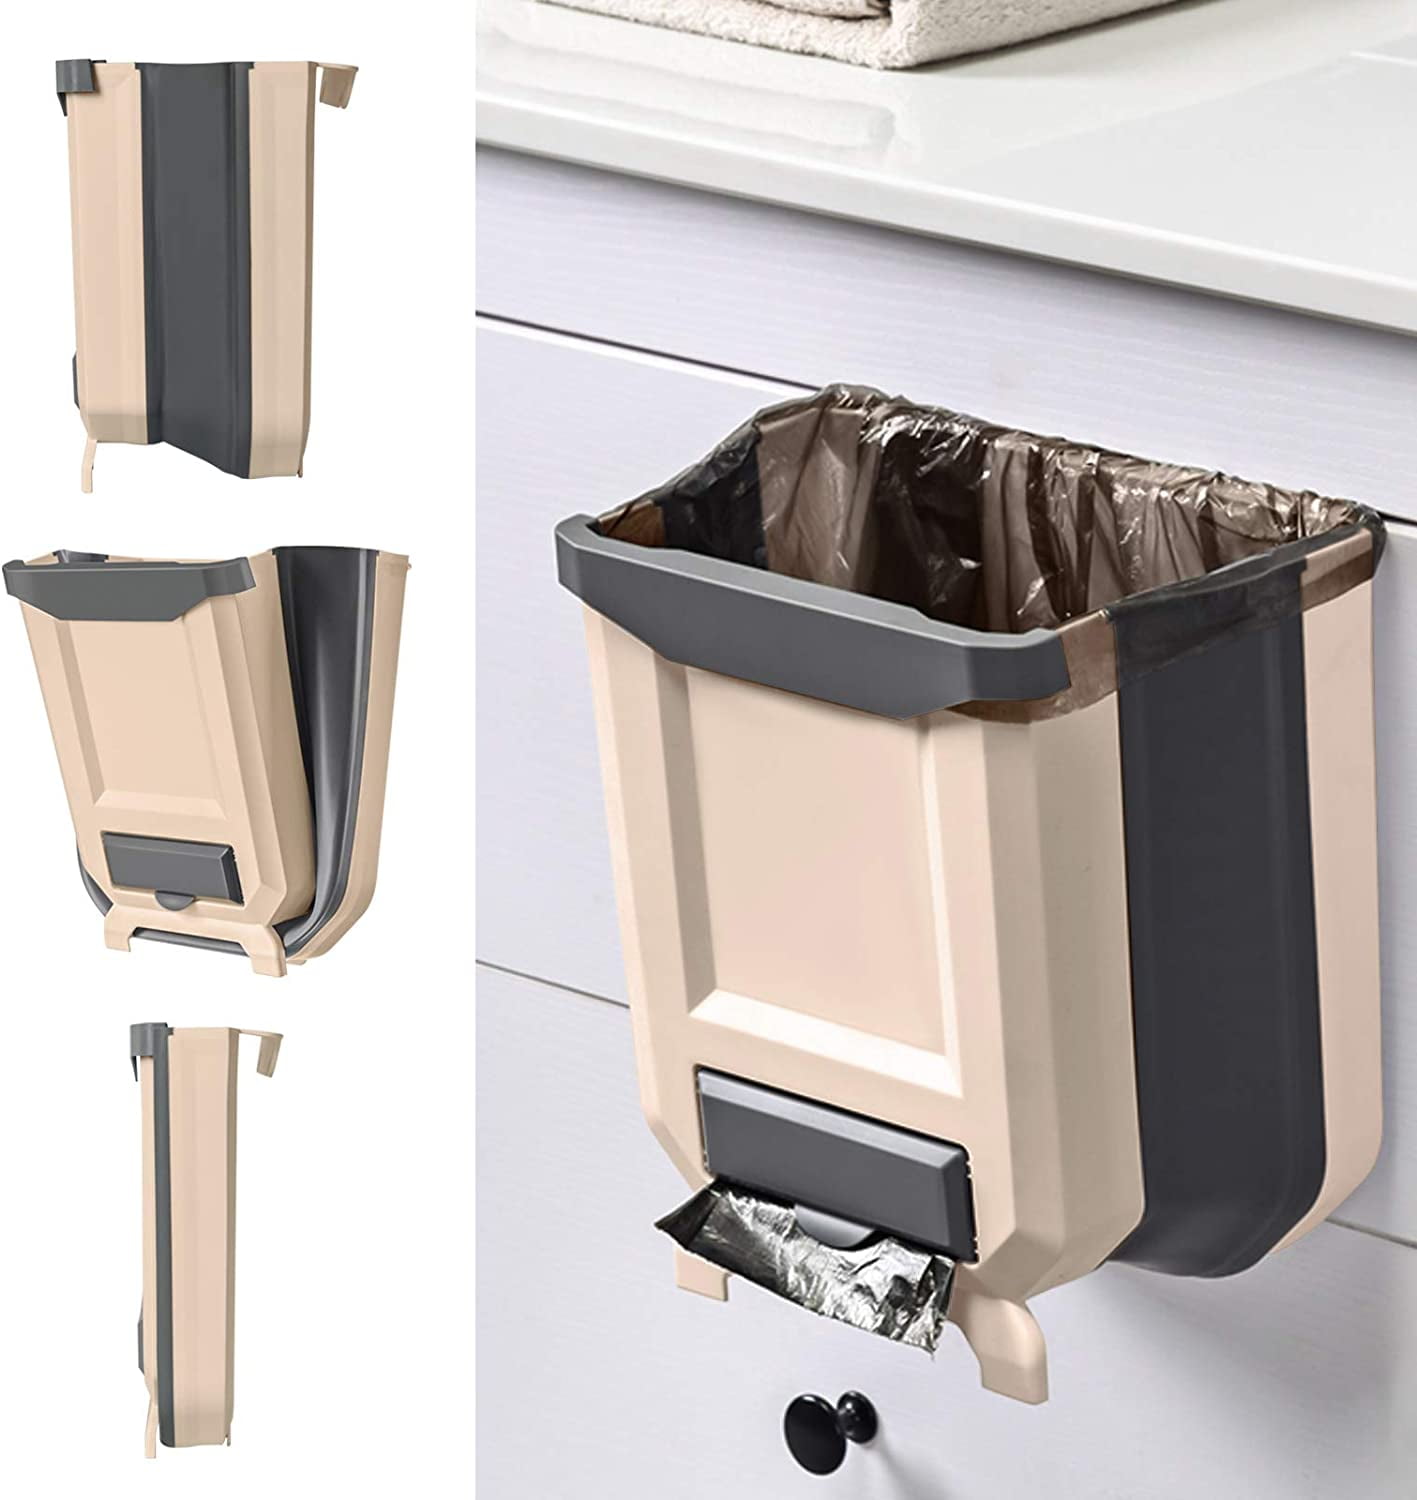 WDPUCHU Hanging Kitchen Trash Can, Foldable Waste Bin for Kitchen,  Collapsible Hang Small Plastic Garbage Can 2.4 Gallon for